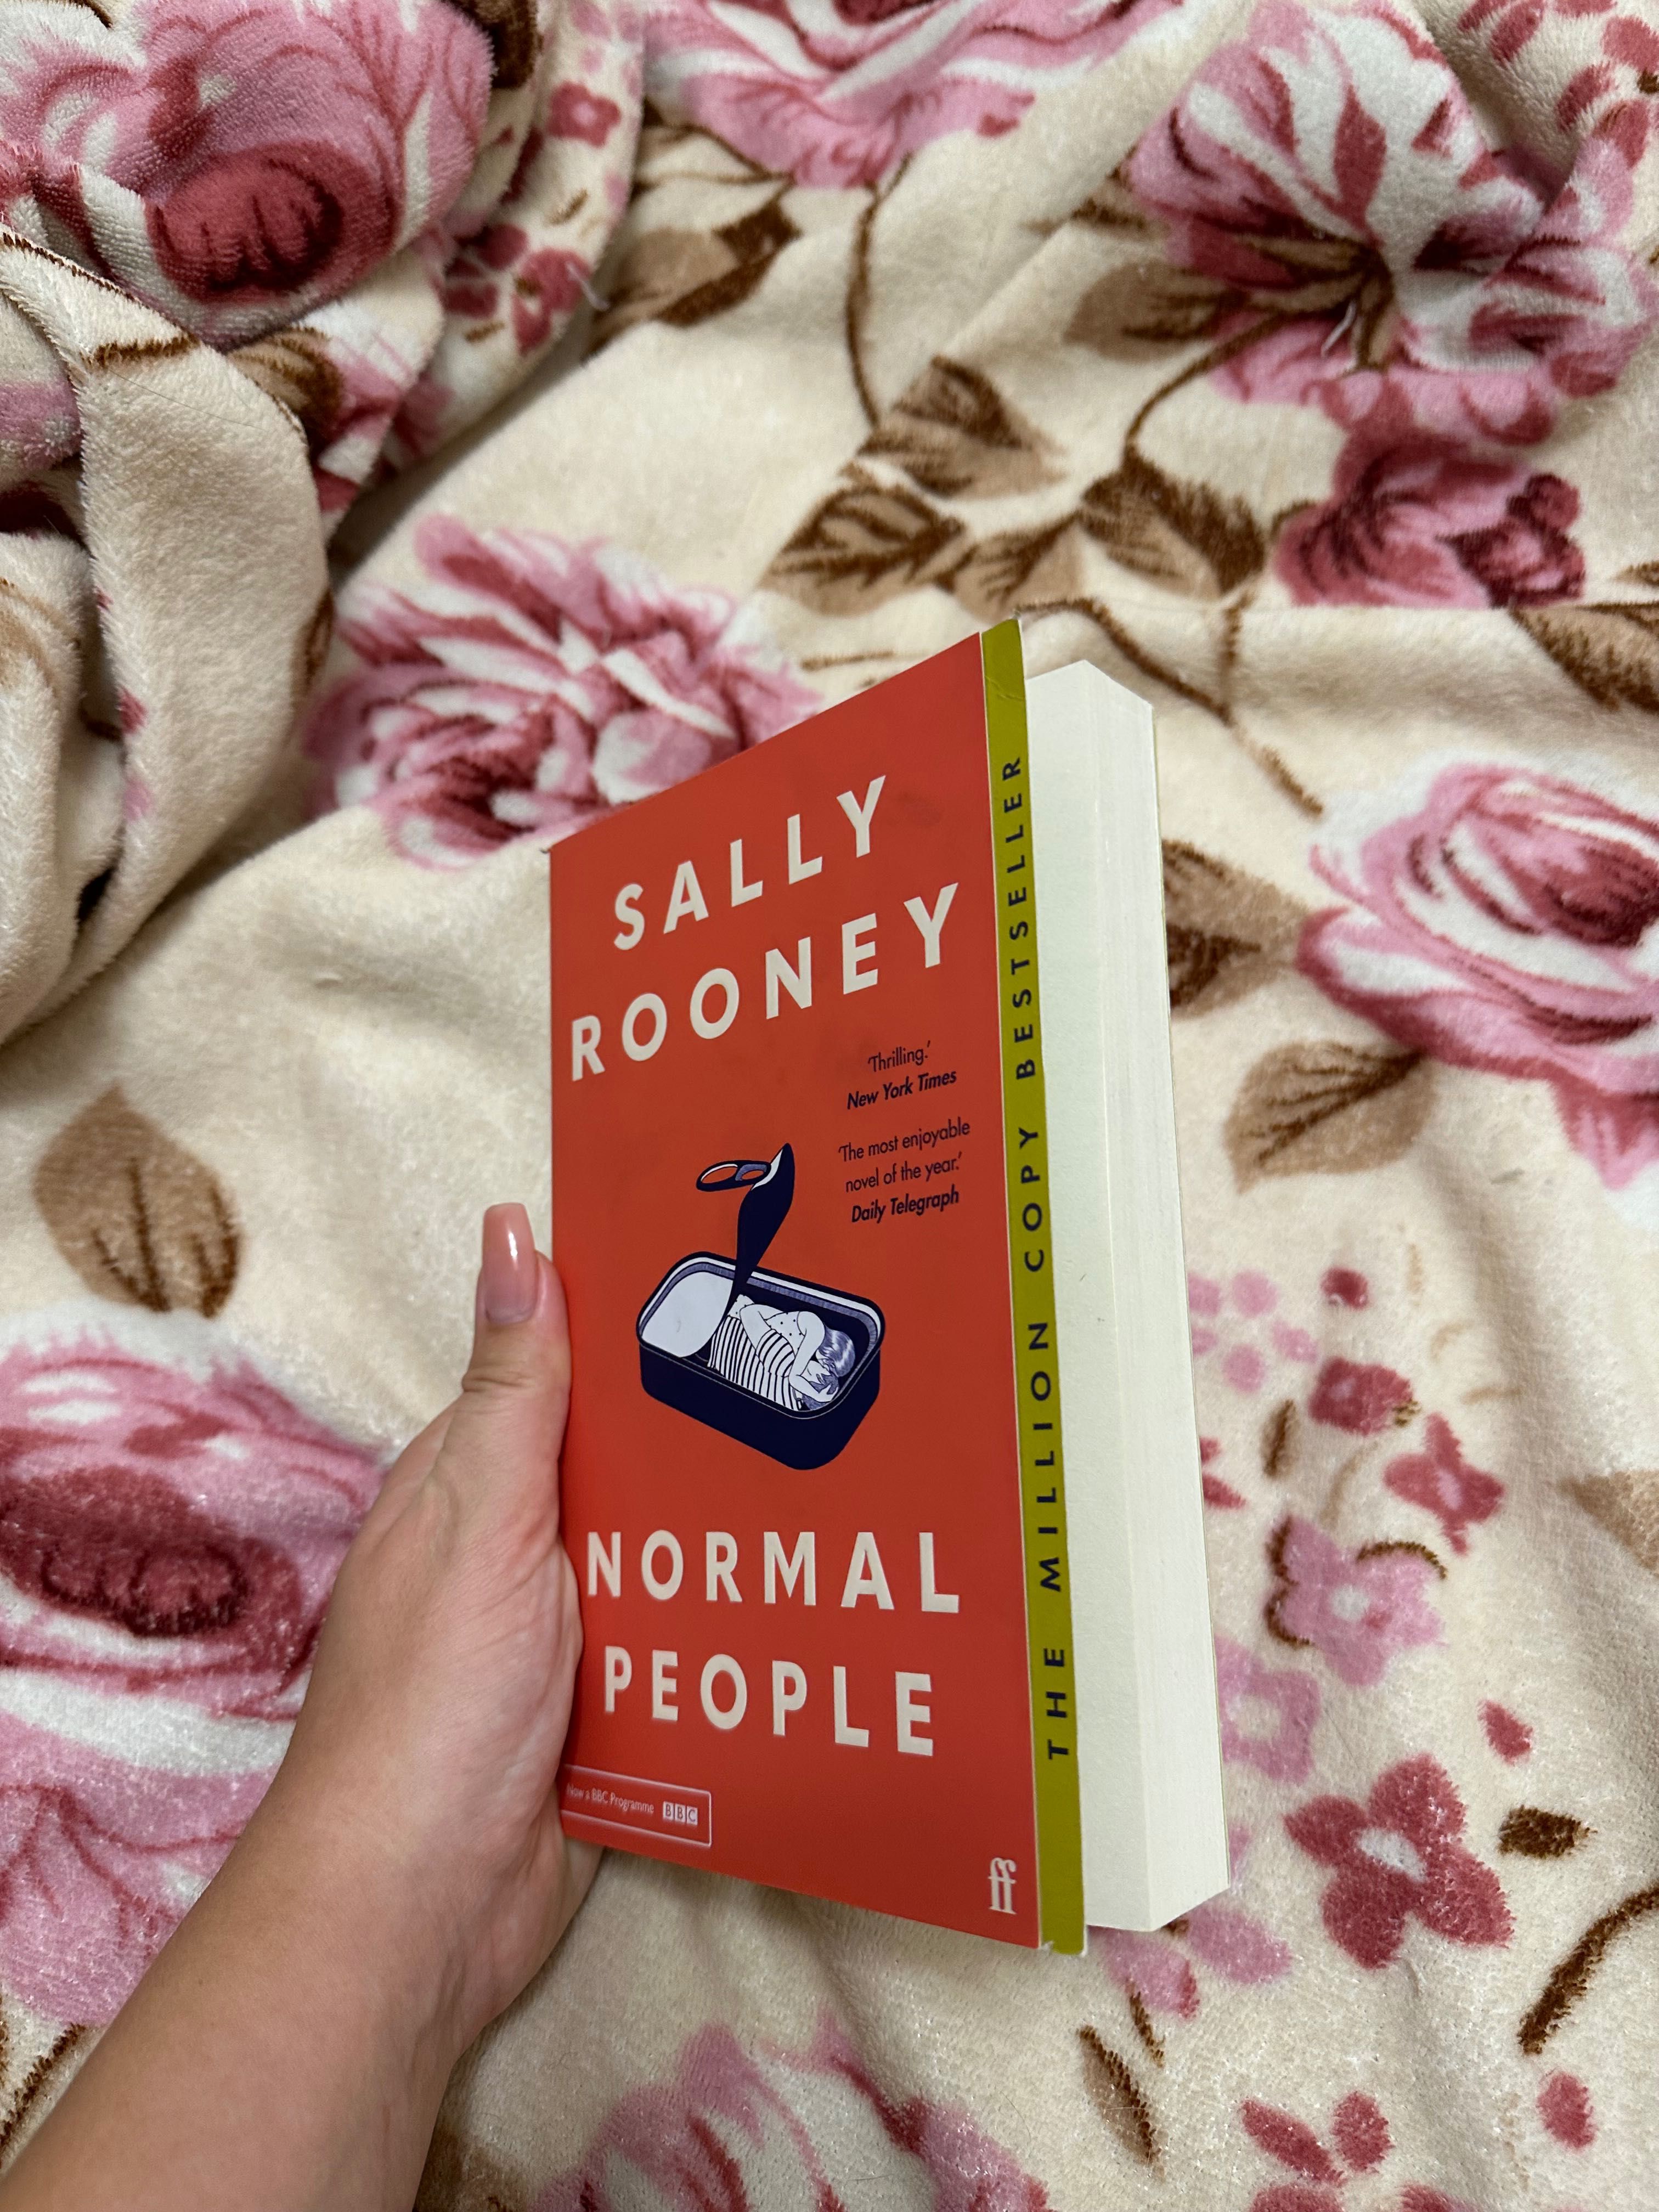 Normal people/ Нормальні люди by Sally Rooney